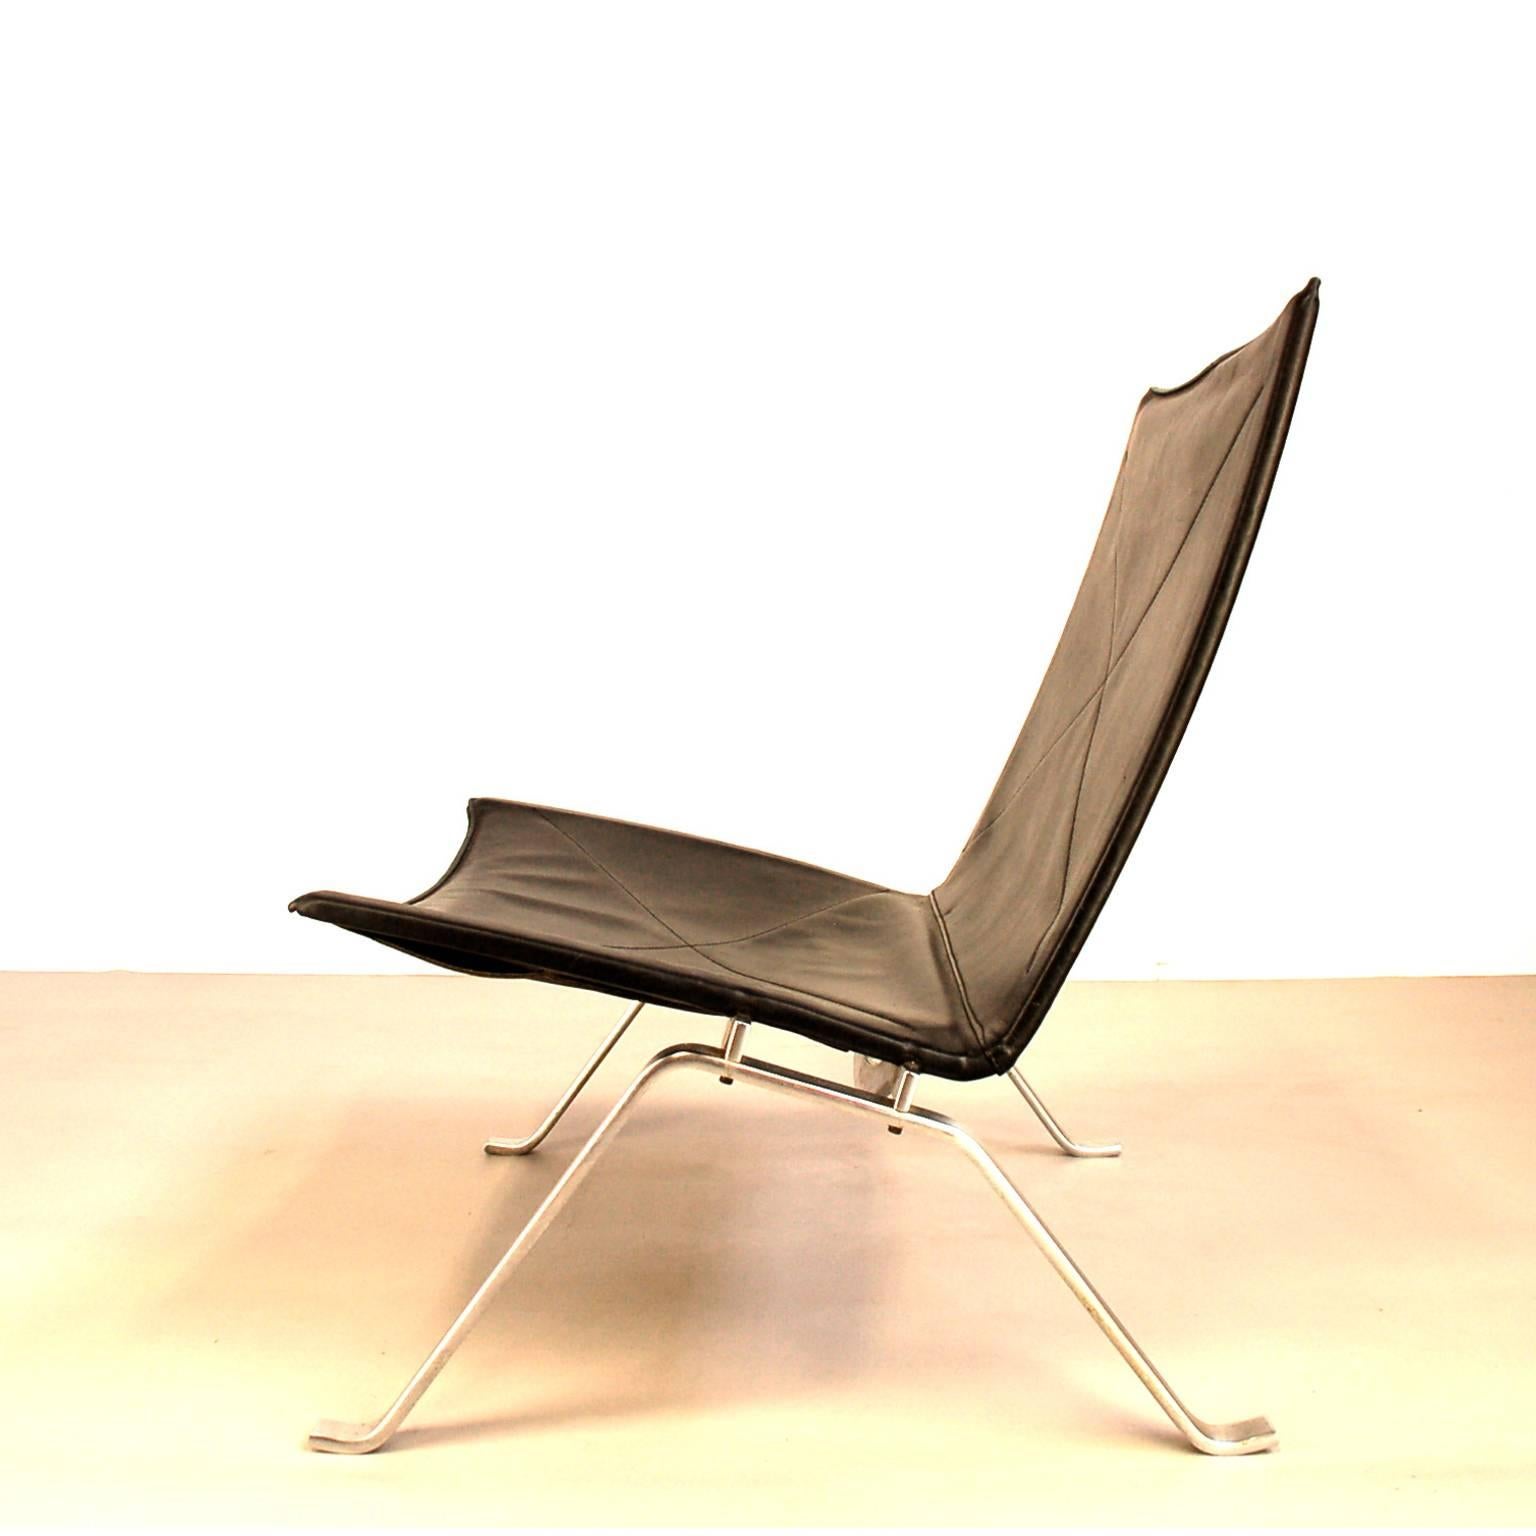 The PK22 lounge chair by Poul Kjaerholm and made by Fritz Hansen (in the year 1984-early production). One of the icons of Danish design. This version has black leather upholstery. The frame is in solid brushed steel with makers mark engraved.

The